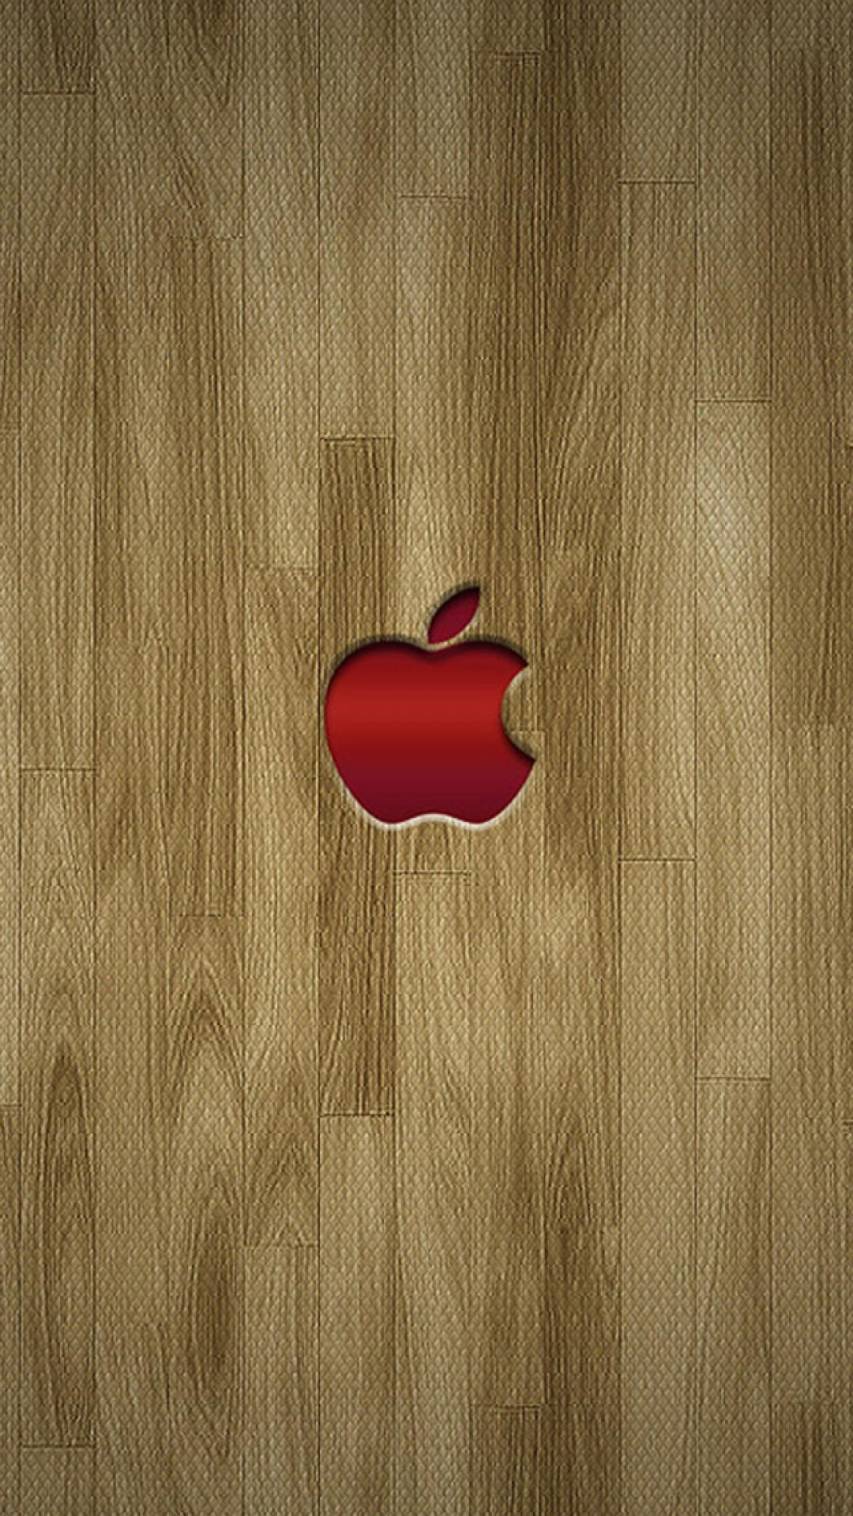 Wood Apple iPhone 6 hd image Backgrounds